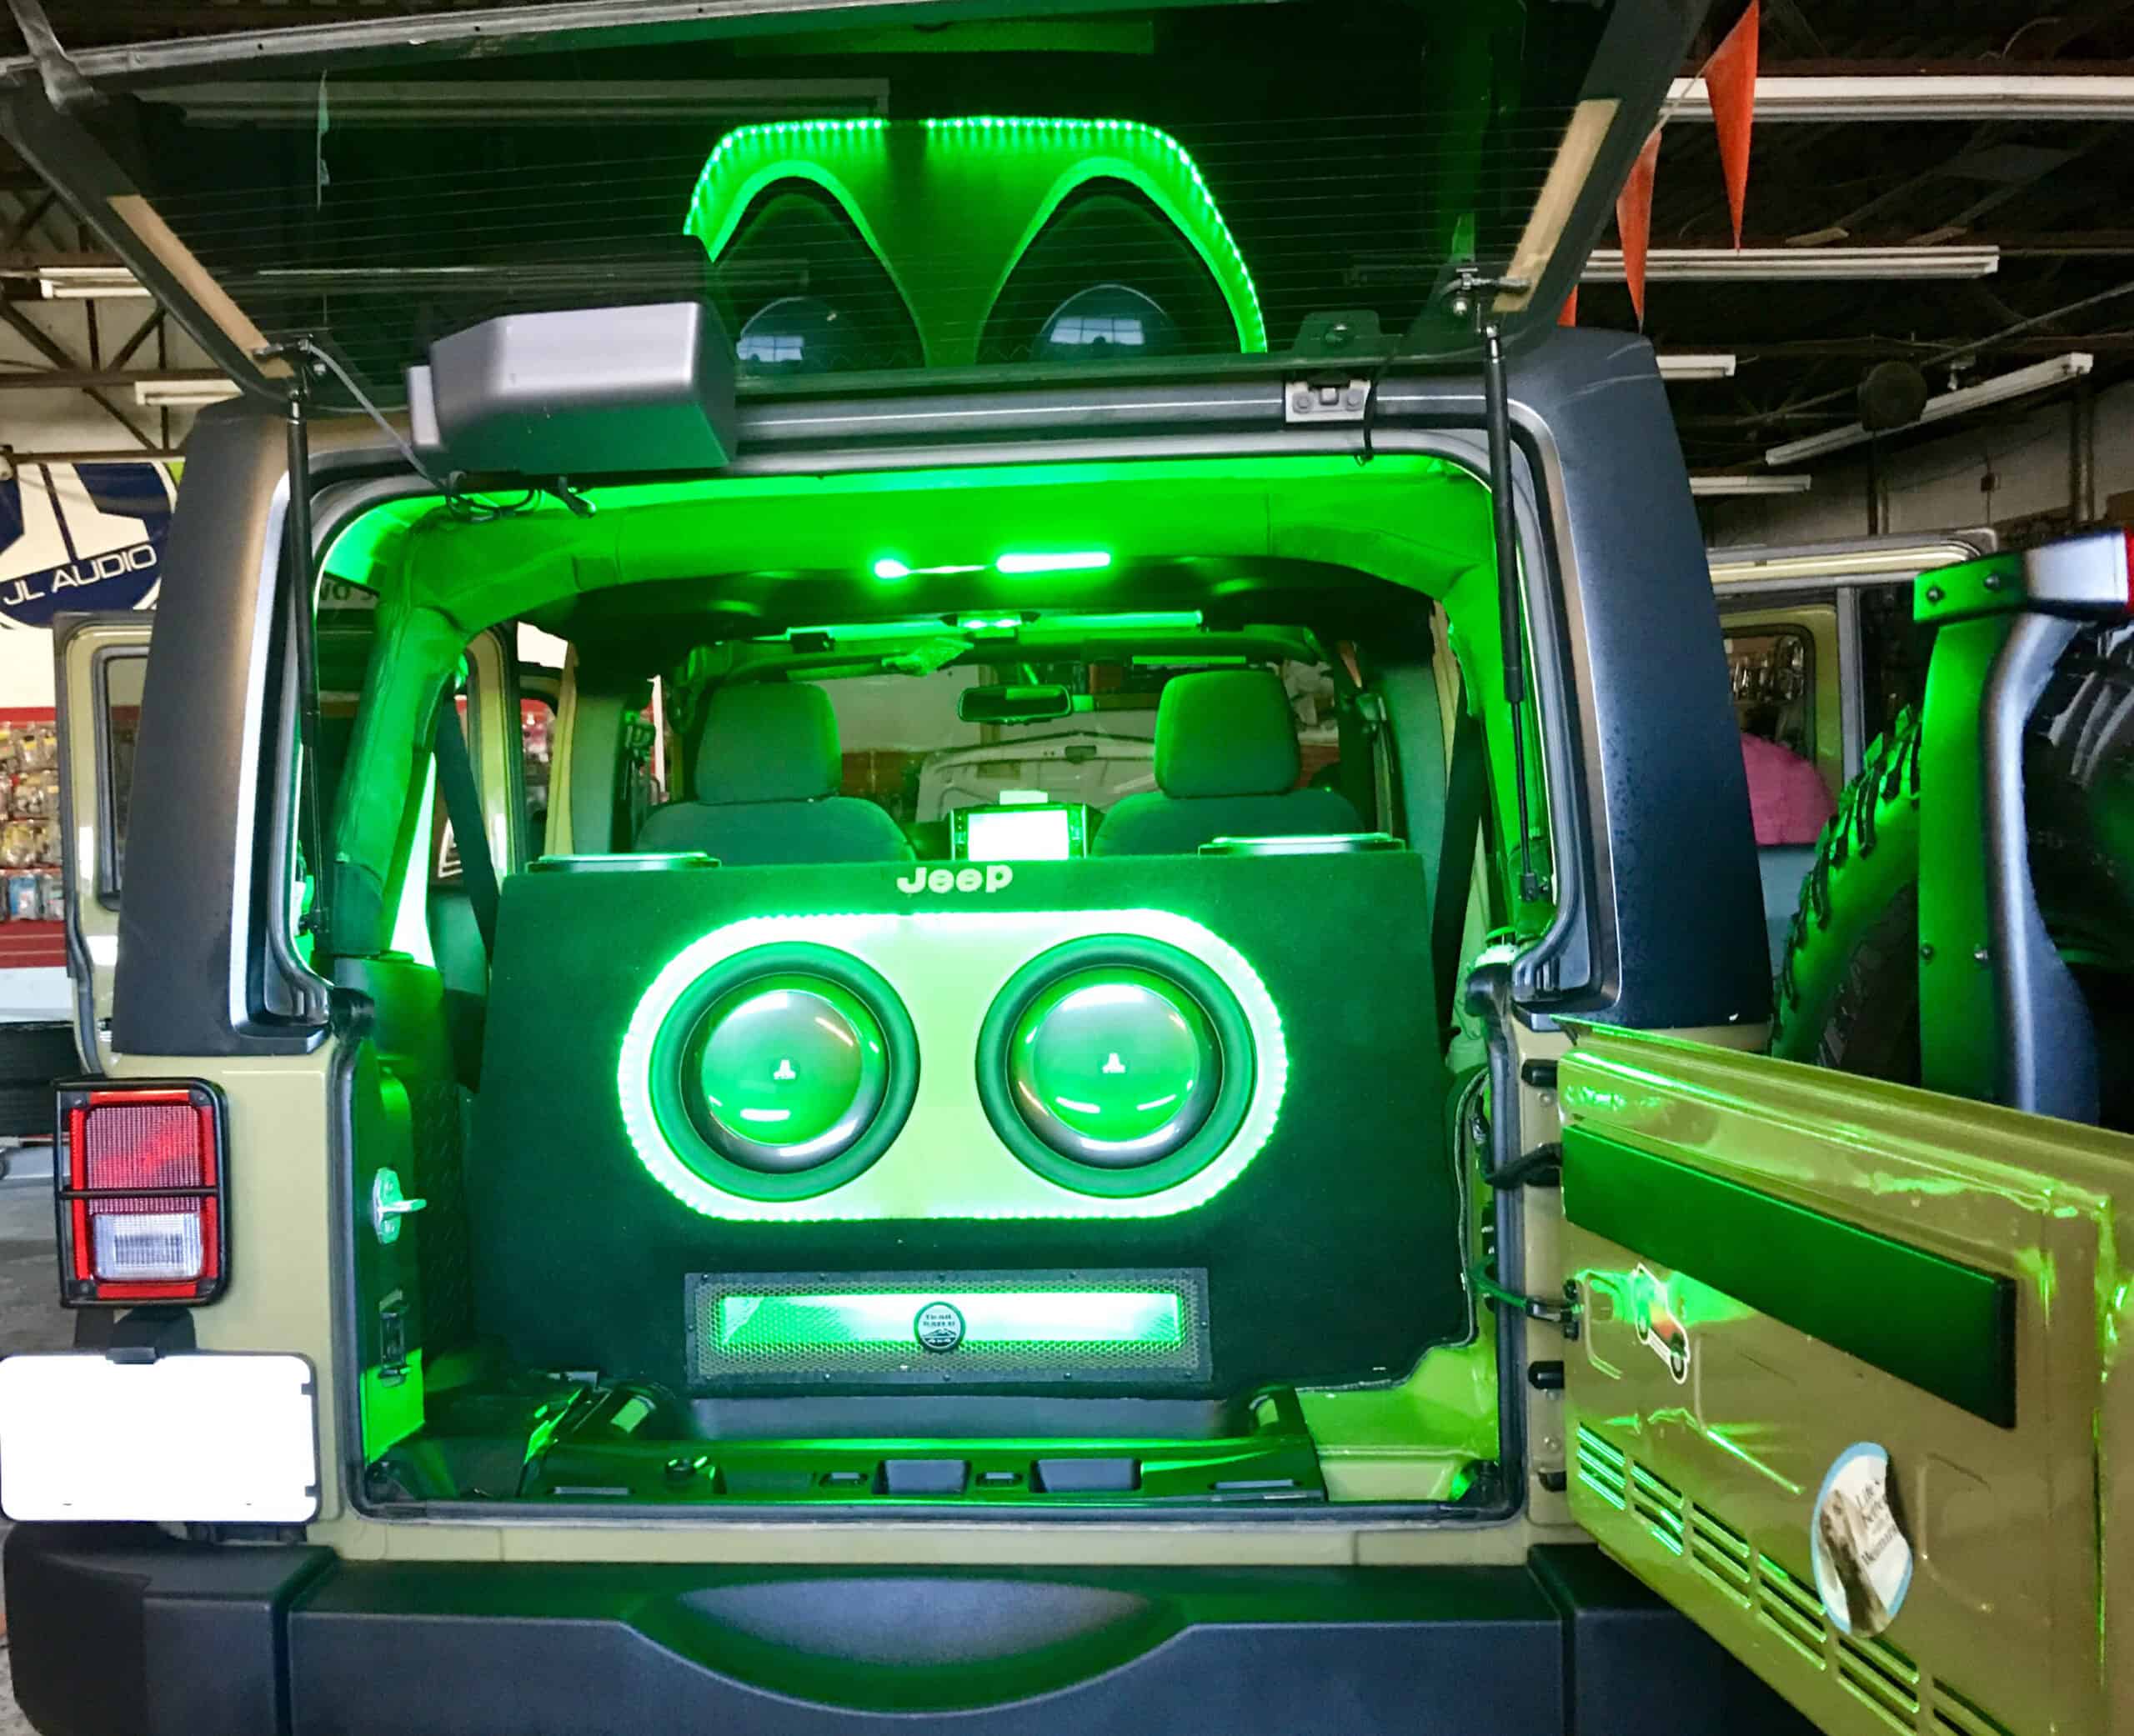 A Jeep, with a powerful car audio system and customized lighting.